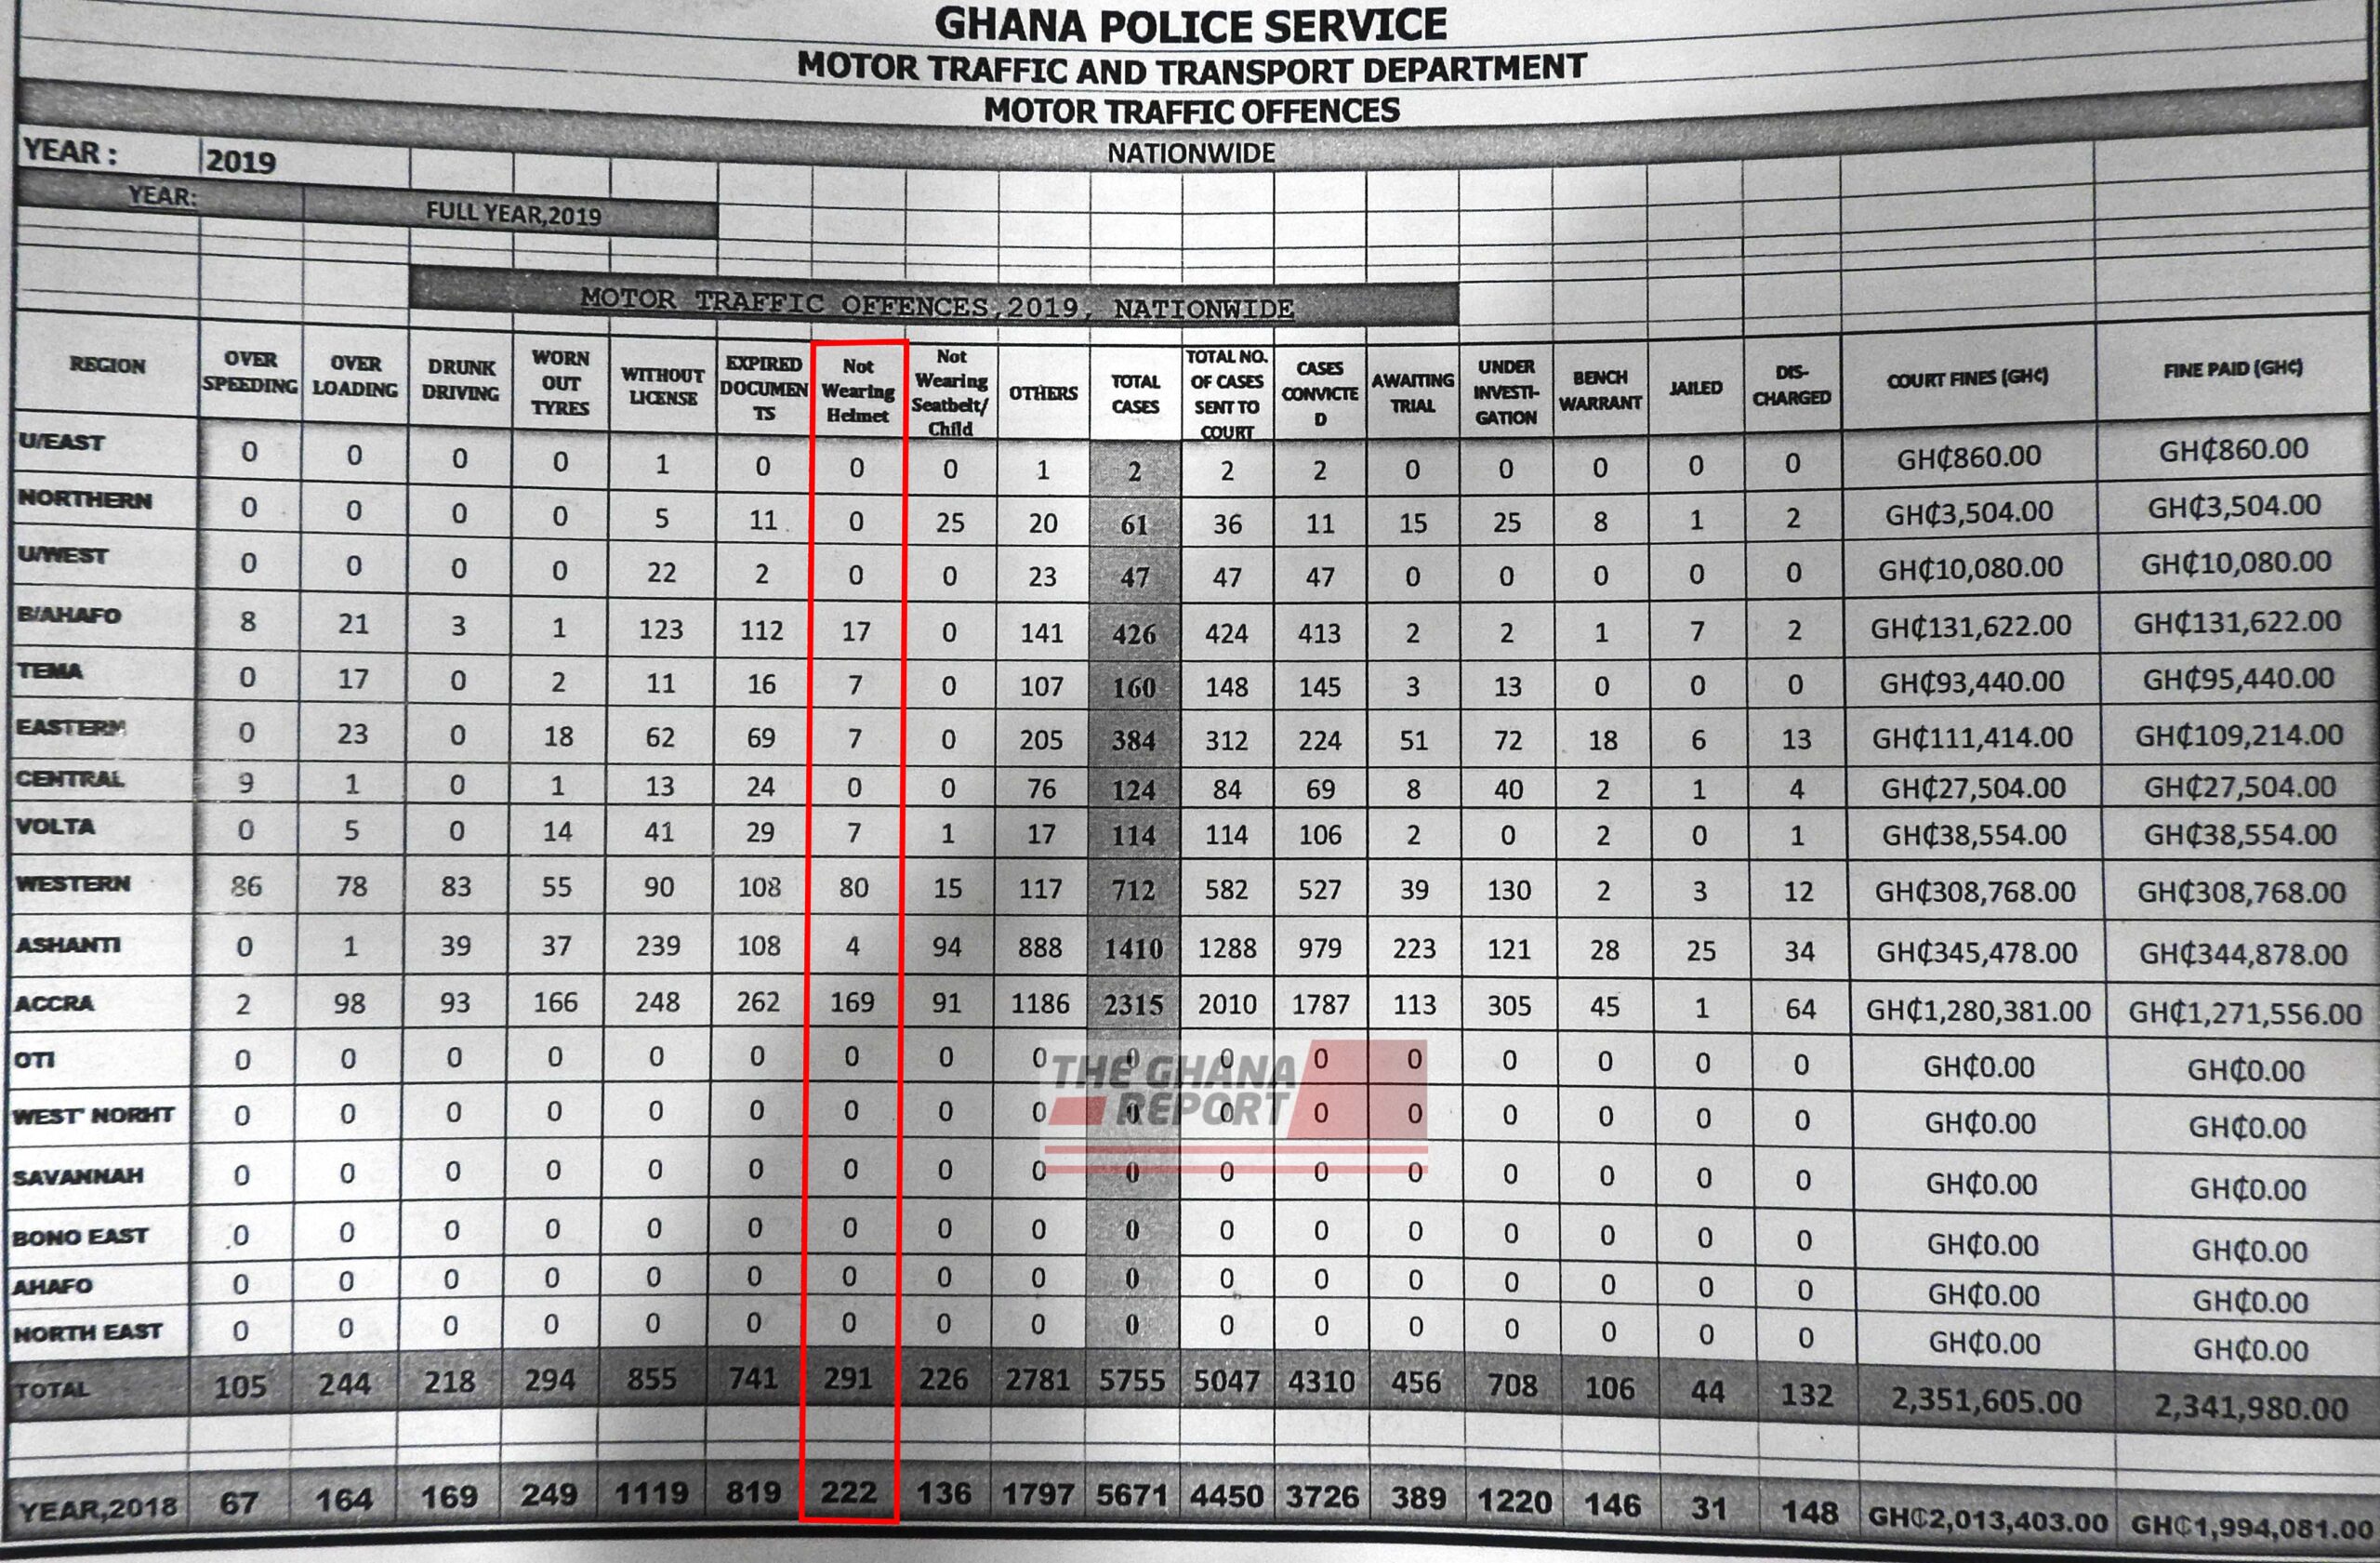 2019 Statistics on arrests and prosecutions. Source: MTTD